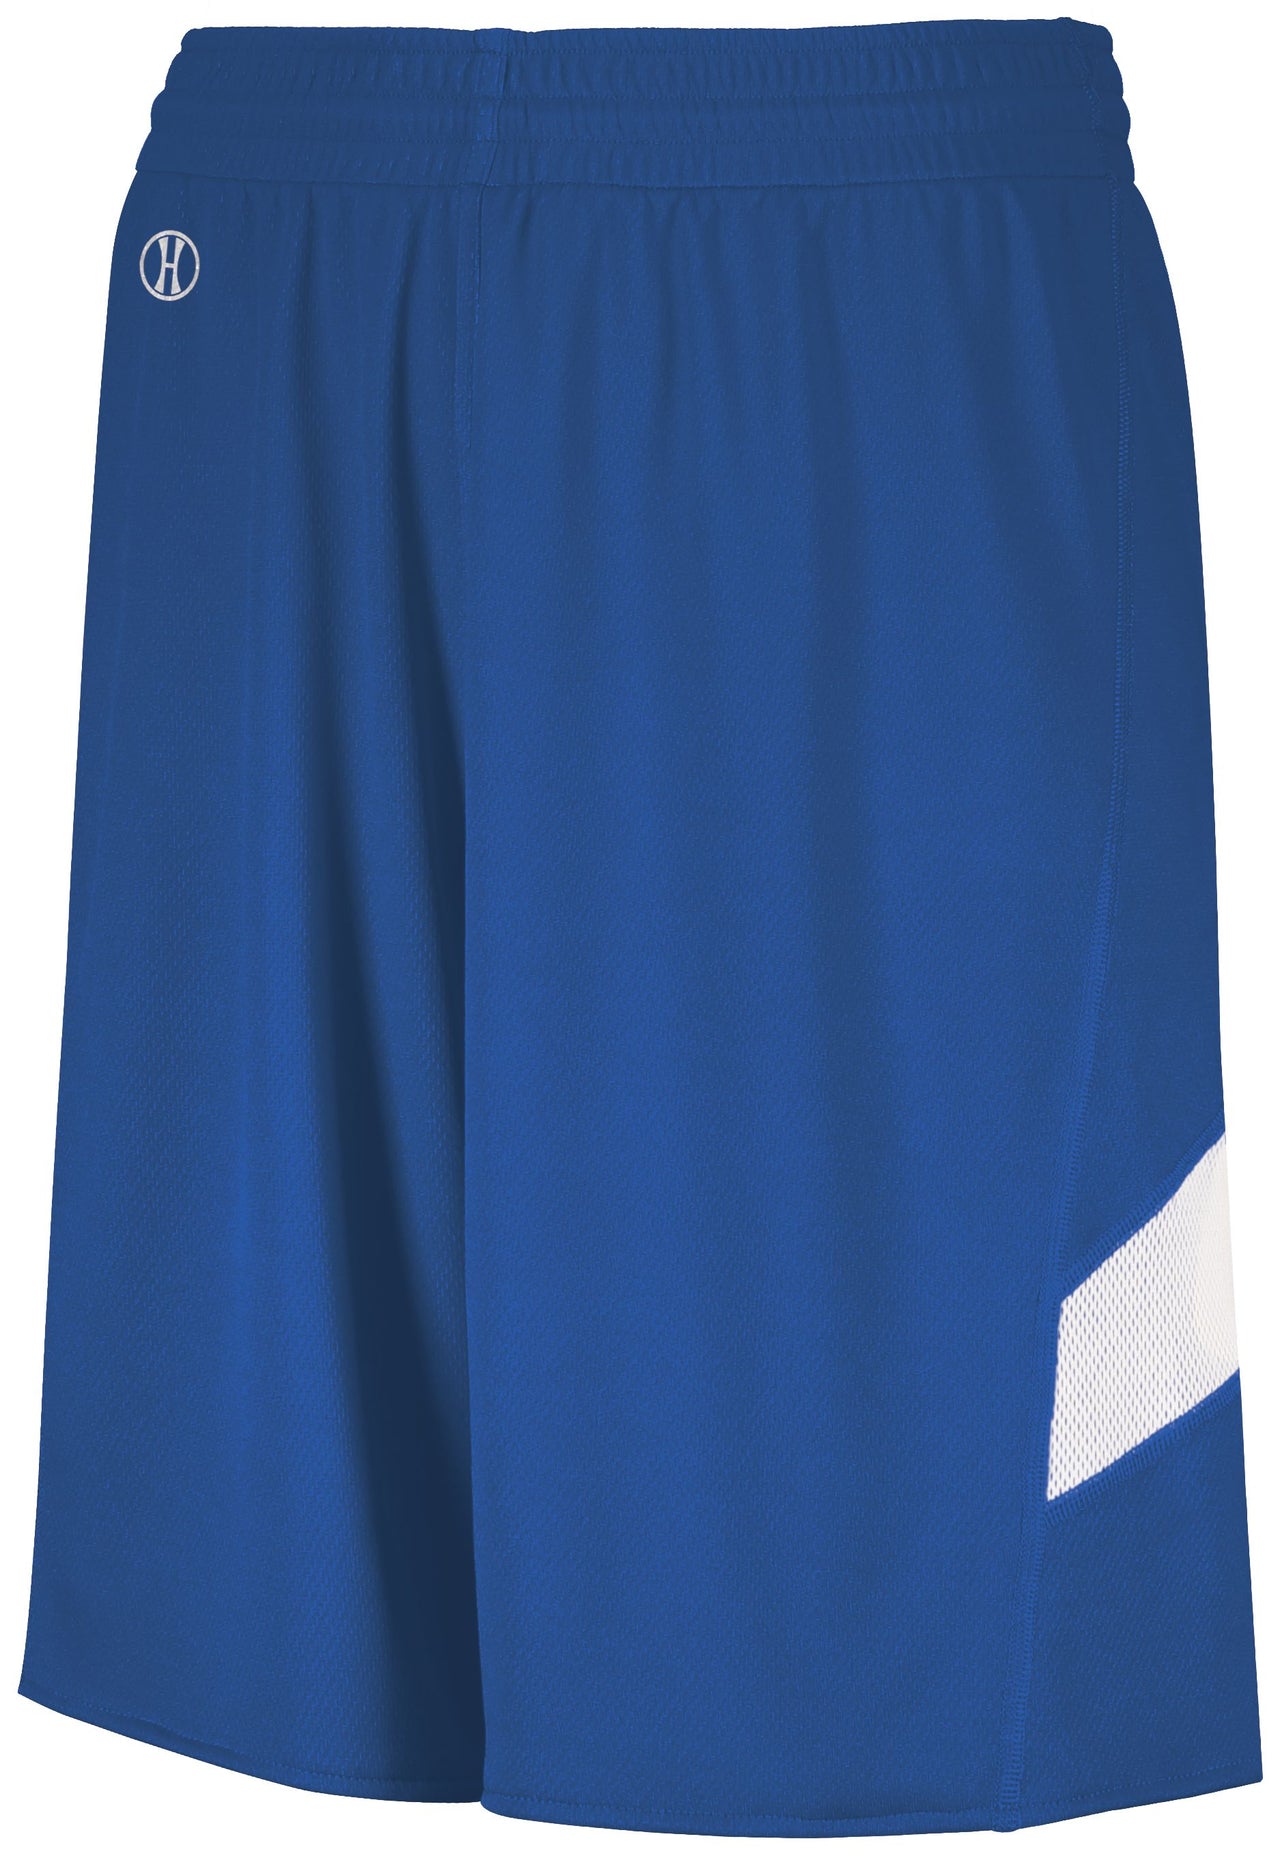 Youth Dual-Side Single Ply Basketball Shorts - 224279